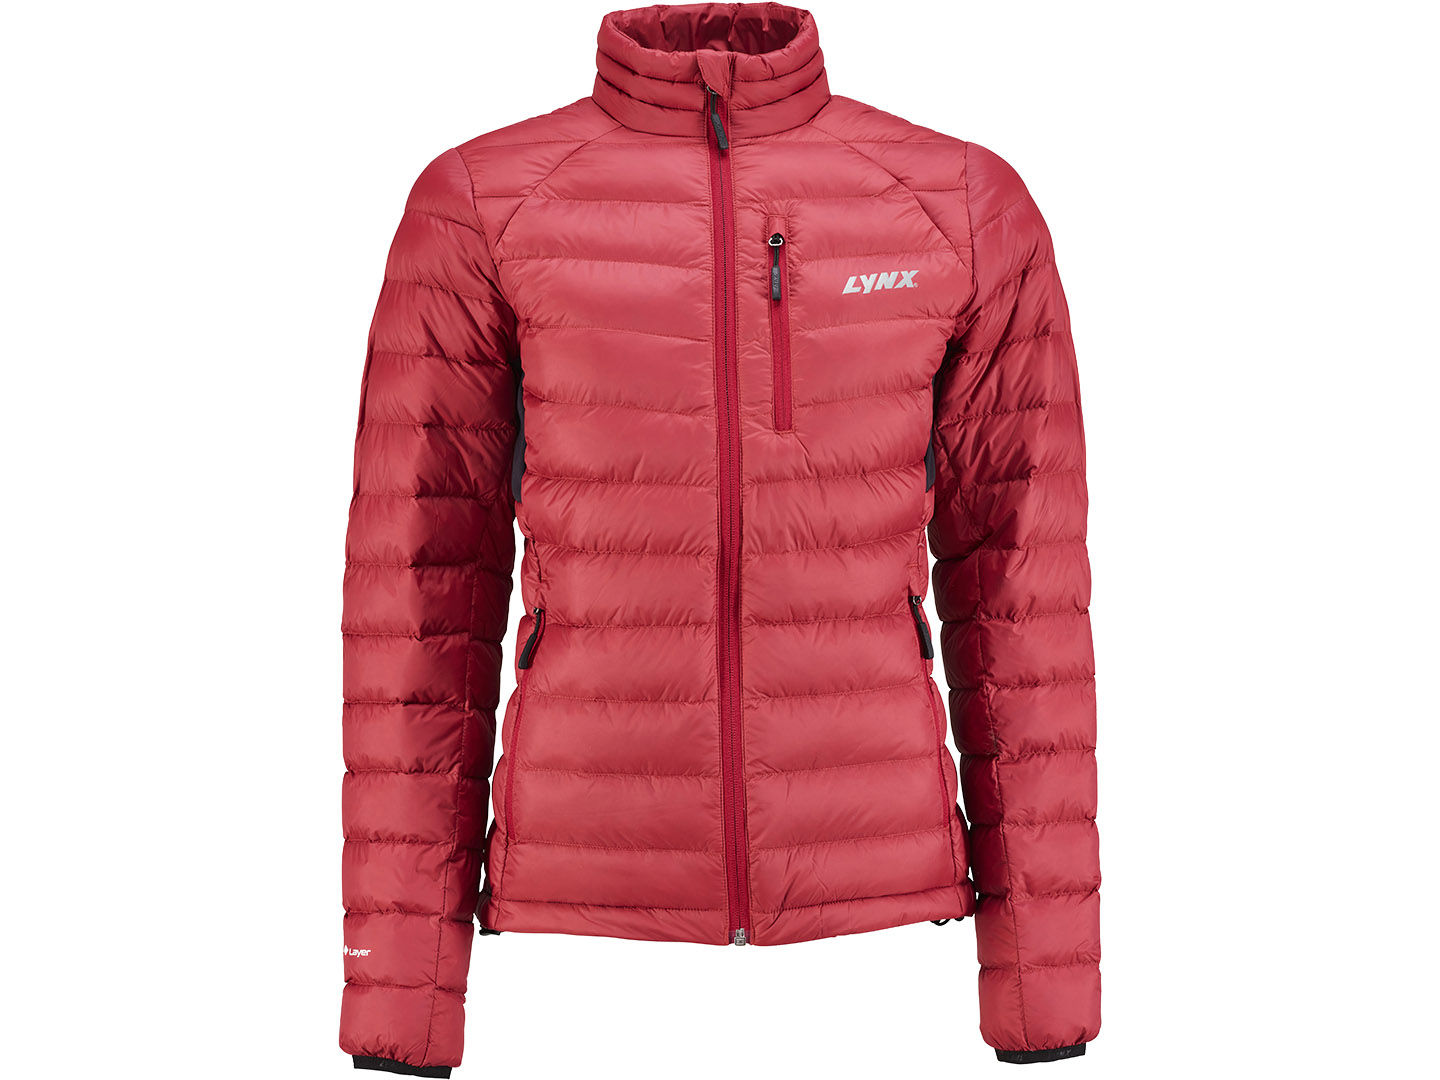 Red Lynx packable down jacket for women